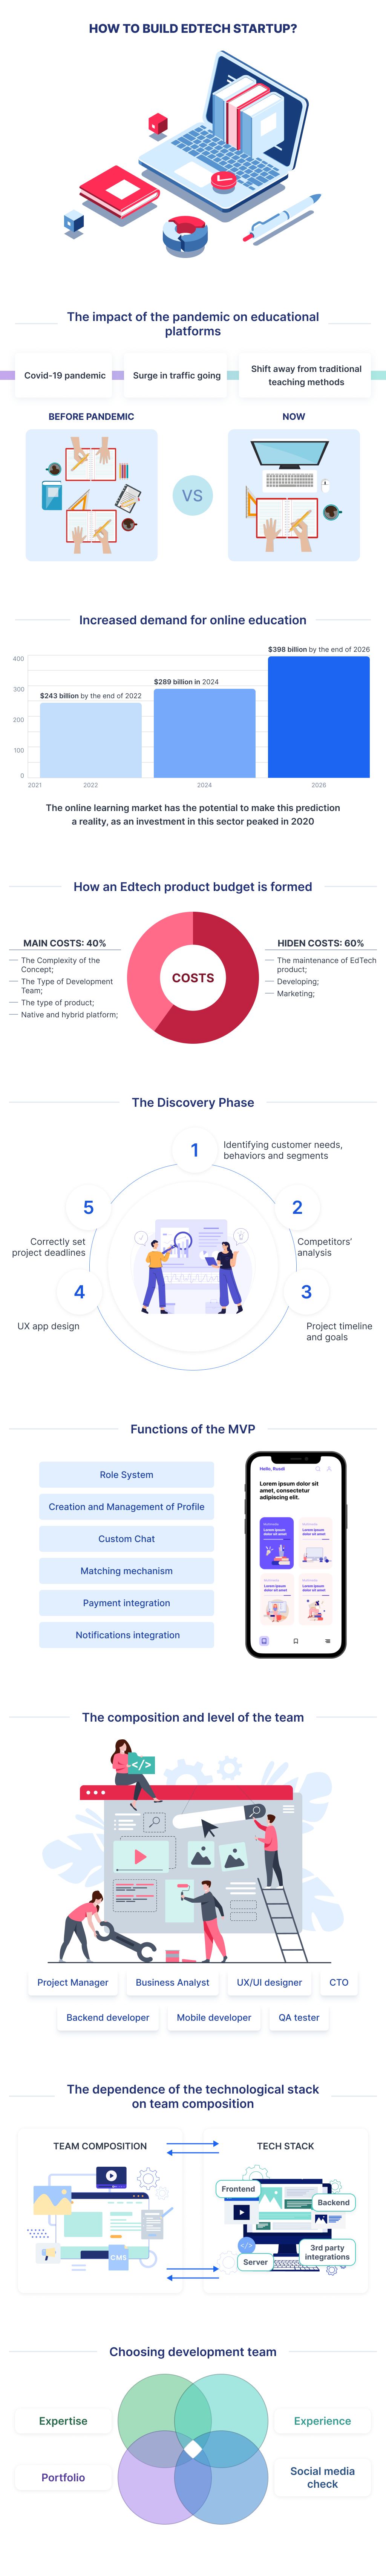 This infographic explains how to create a custom educational app in a few steps and why now is the right time to do it